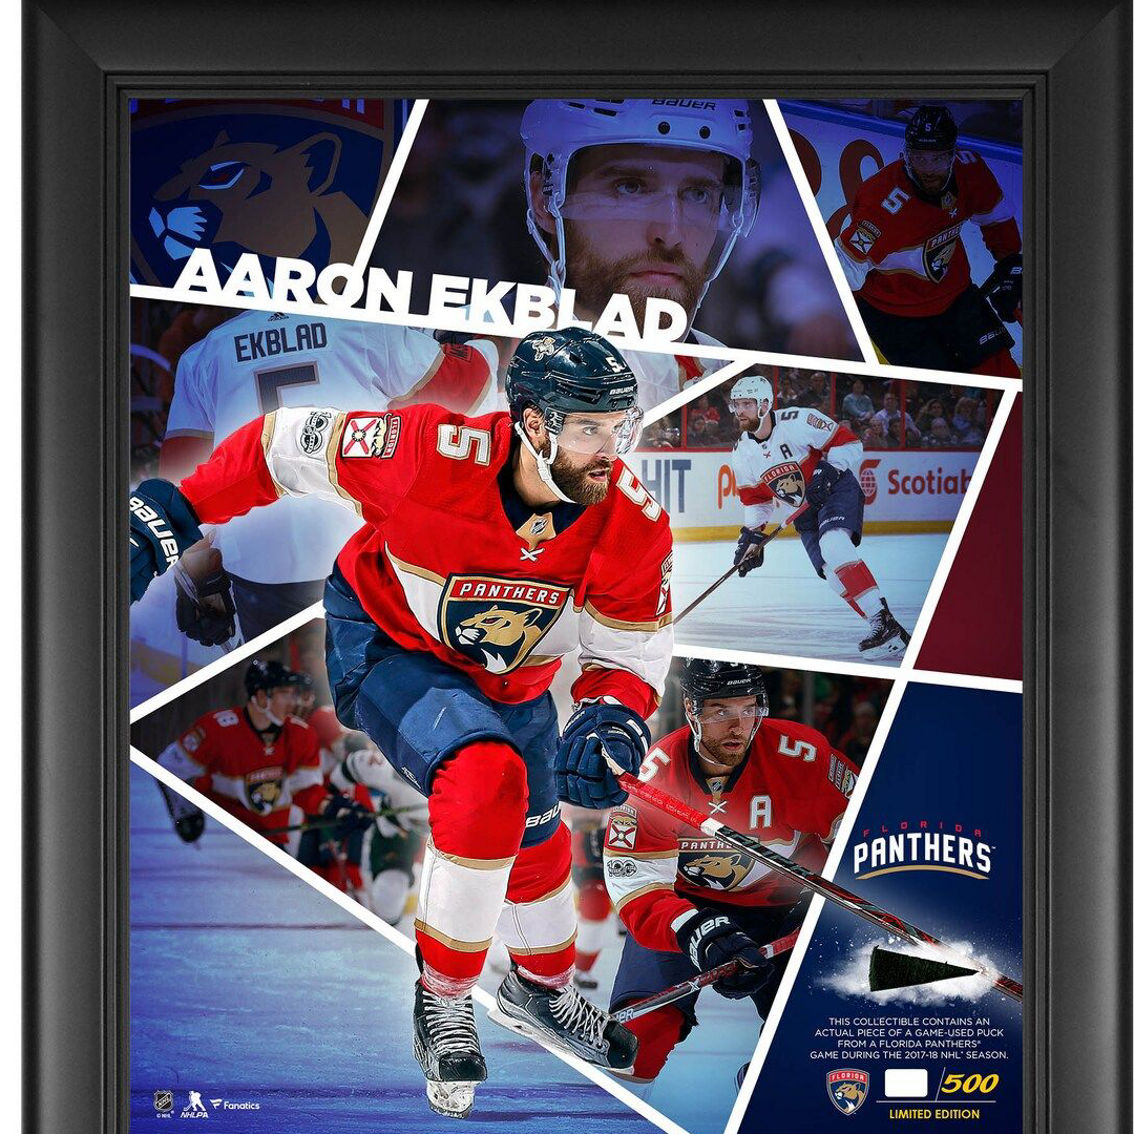 Fanatics Authentic Aaron Ekblad Florida Panthers Framed 15'' x 17'' Impact Player Collage with a Piece of Game-Used Puck - Limited Edition of 500 - Image 2 of 2